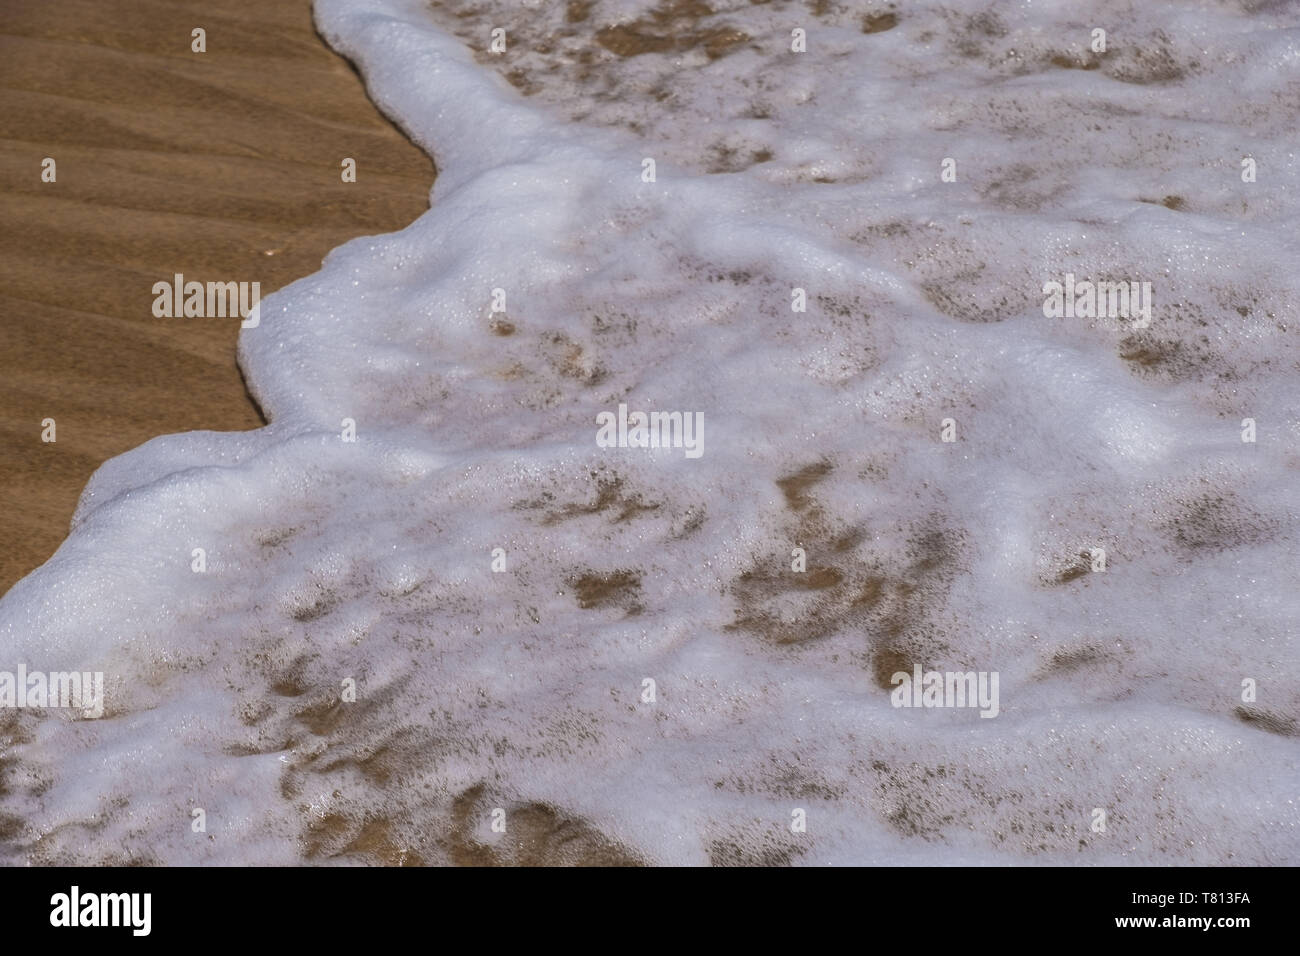 Sea or oceanic wave washing over sand - foamy pattern, background. Photo of wet sand on the beach. Stock Photo